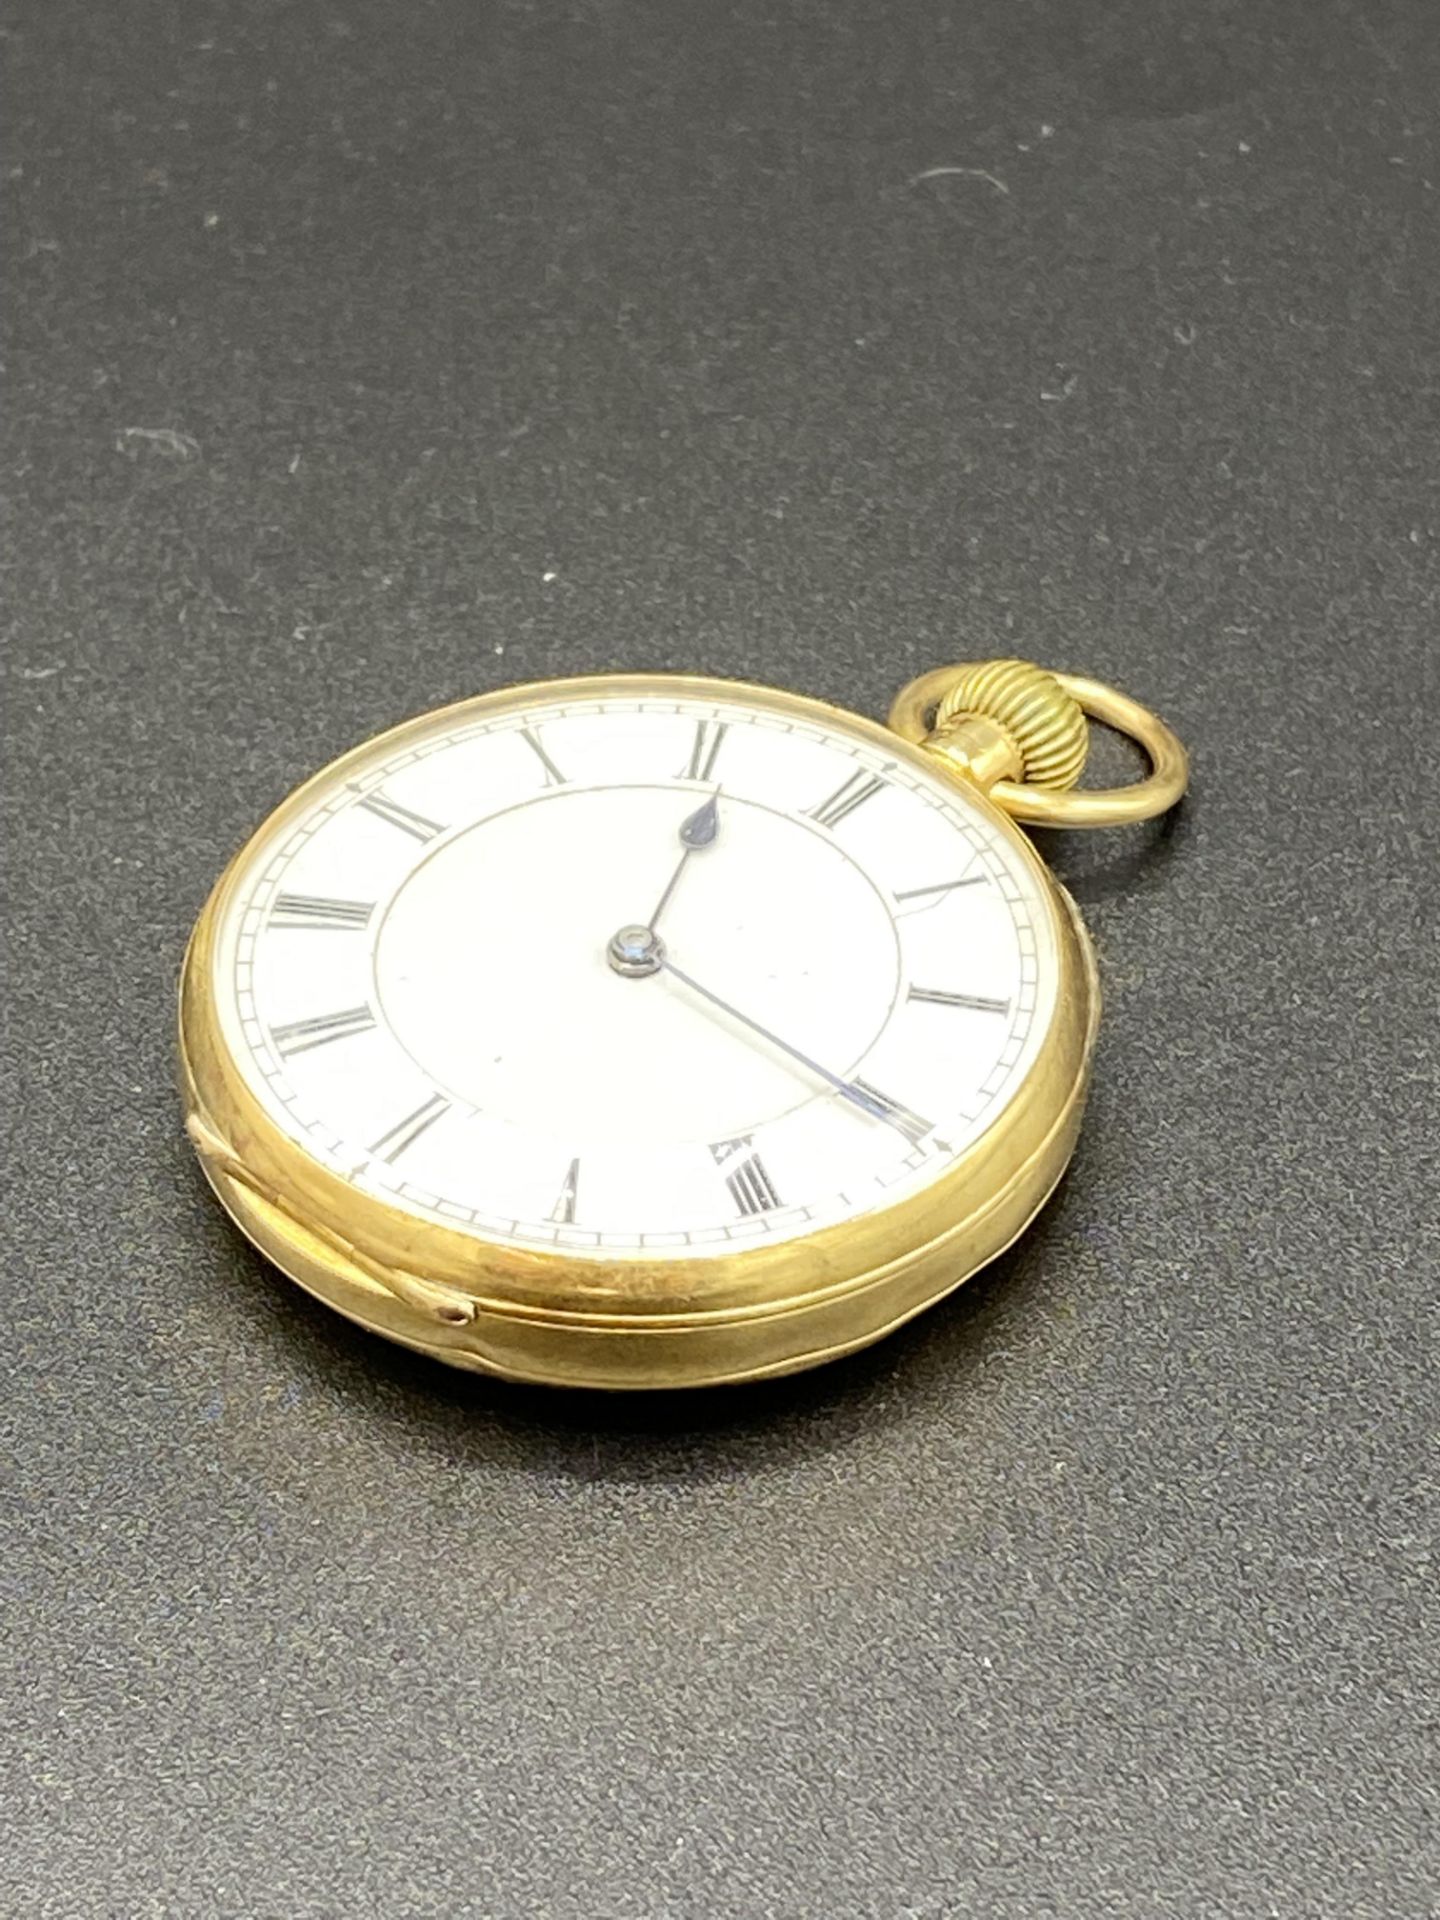 Gold coloured metal pocket watch - Image 5 of 5